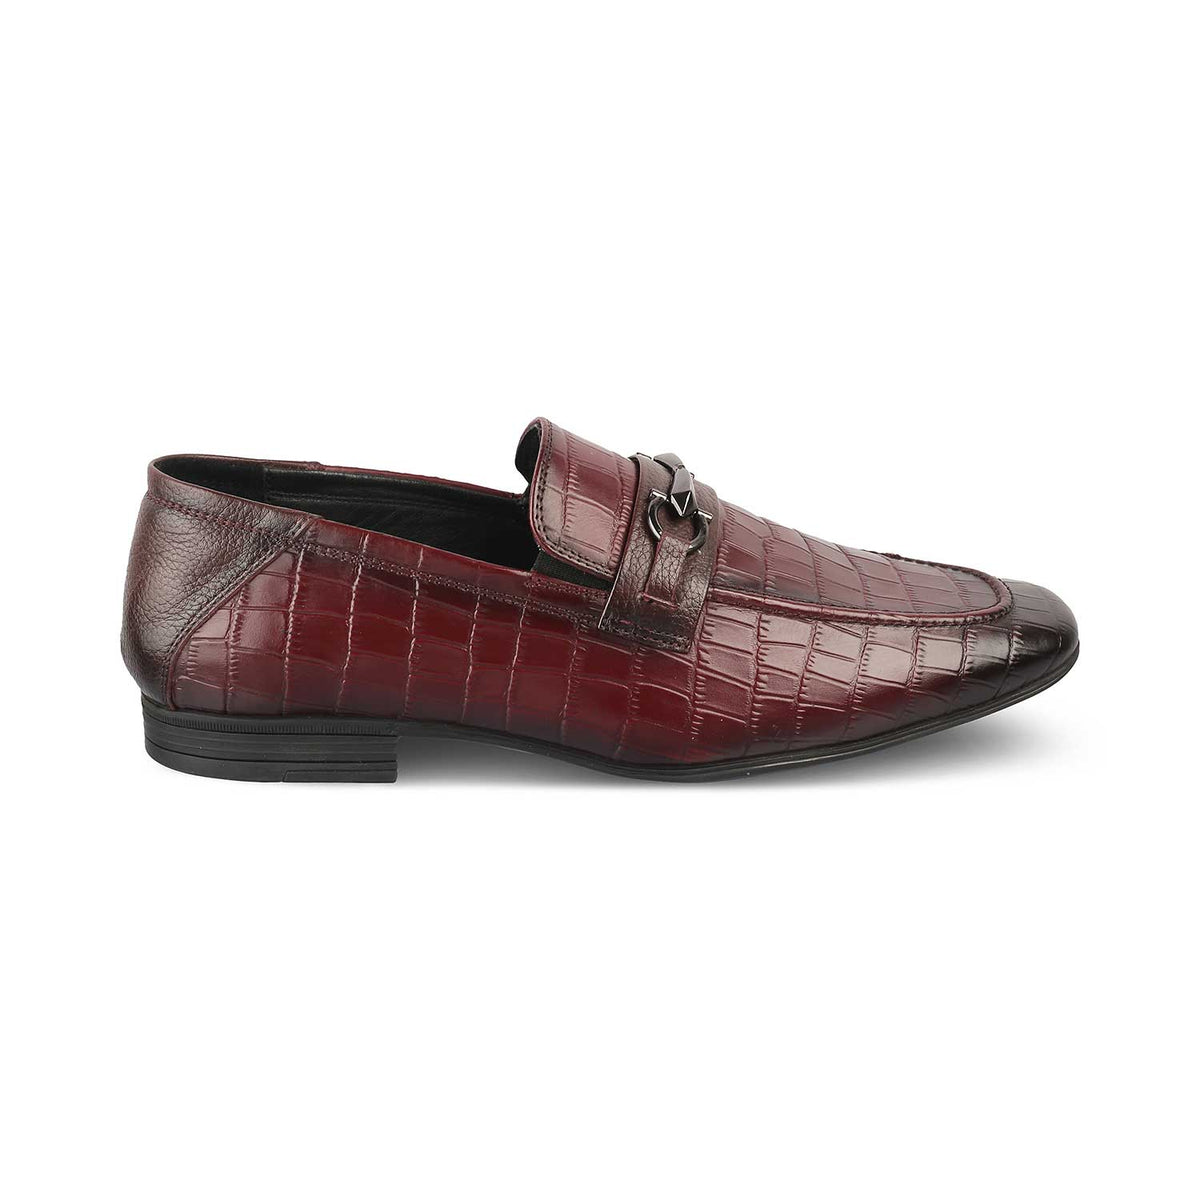 The Reptile Wine Mens Leather Loafers - Tresmode